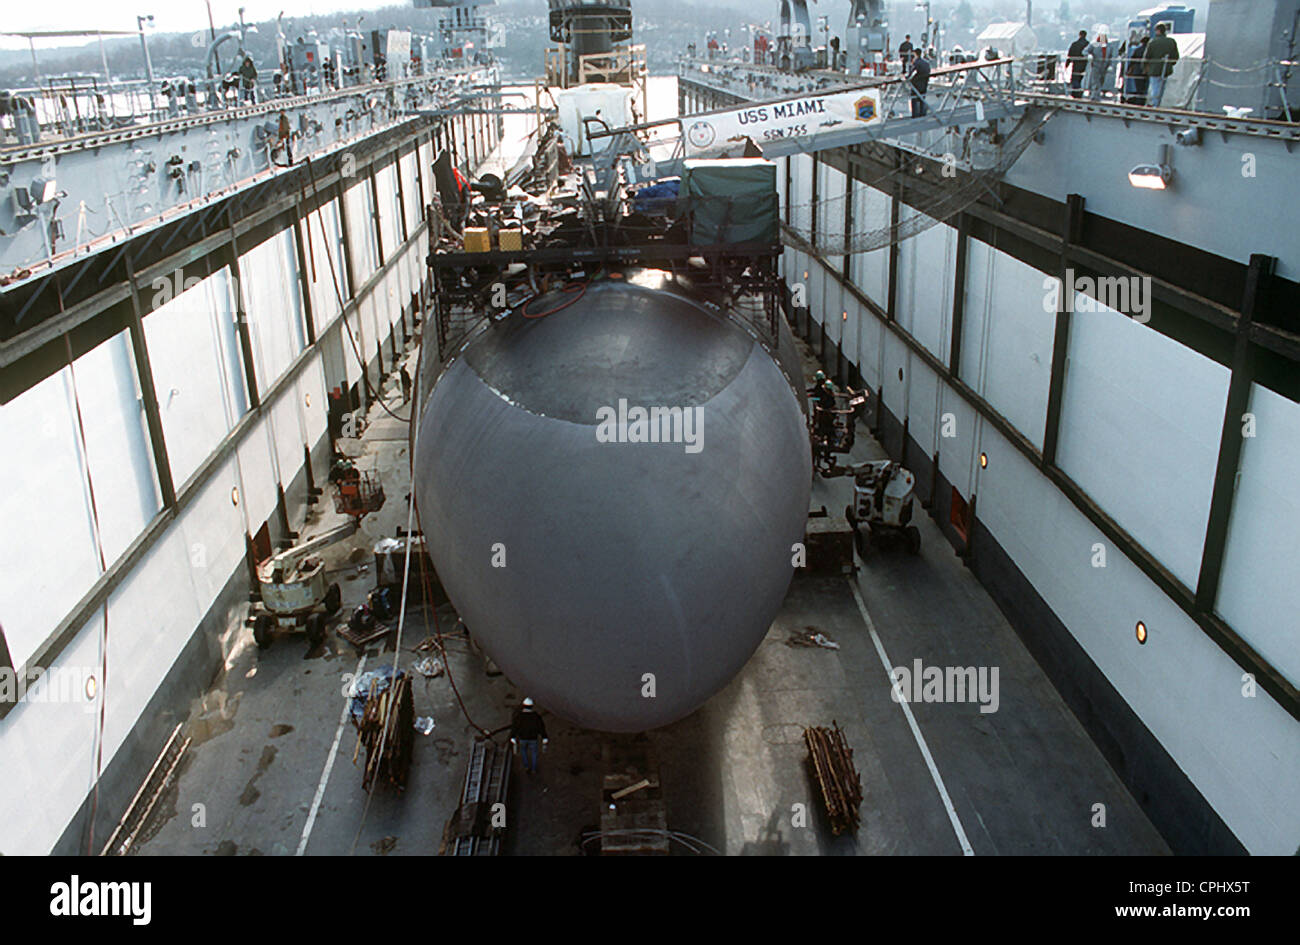 The Los Angeles-class nuclear powered fast attack submarine USS Miami (SSN 755) in dry dock during a routine hull inspection March 16, 1994 in Groton, CT. Stock Photo